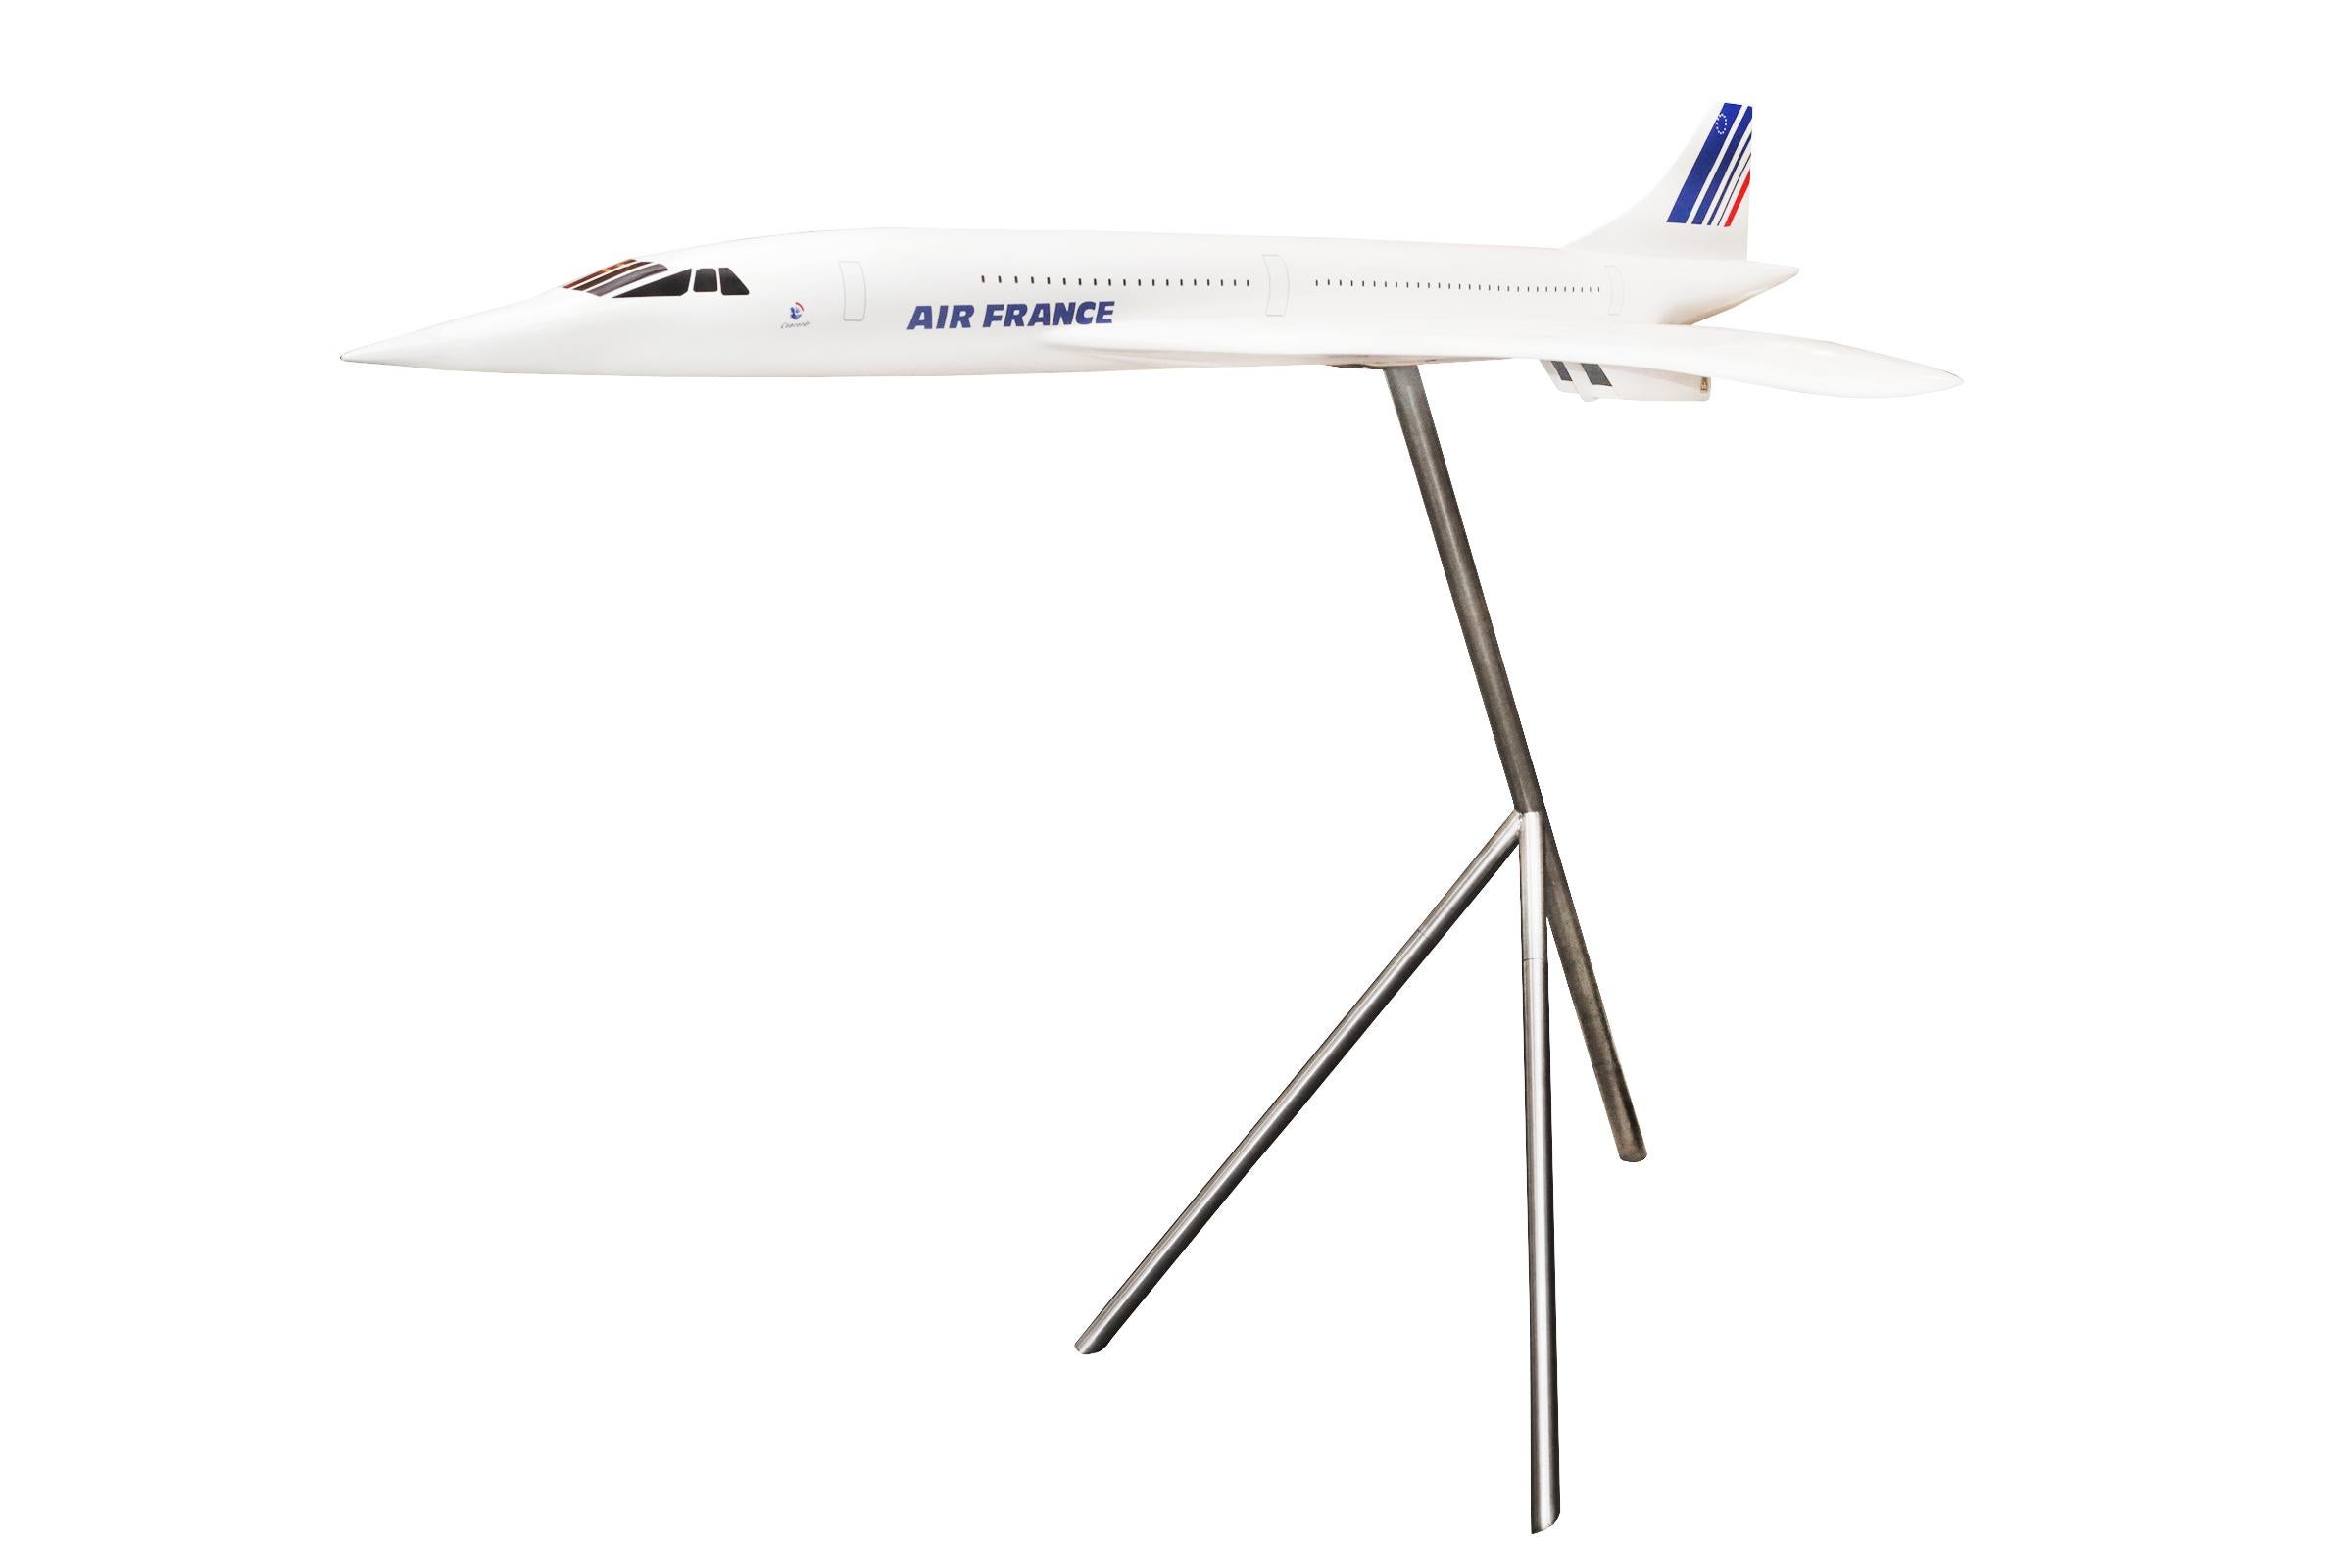 Concorde Model Scale 1/36 sculpture,
in resin fiber, on aluminium polished base.
From Air France Agency.
On base: height 110cm.